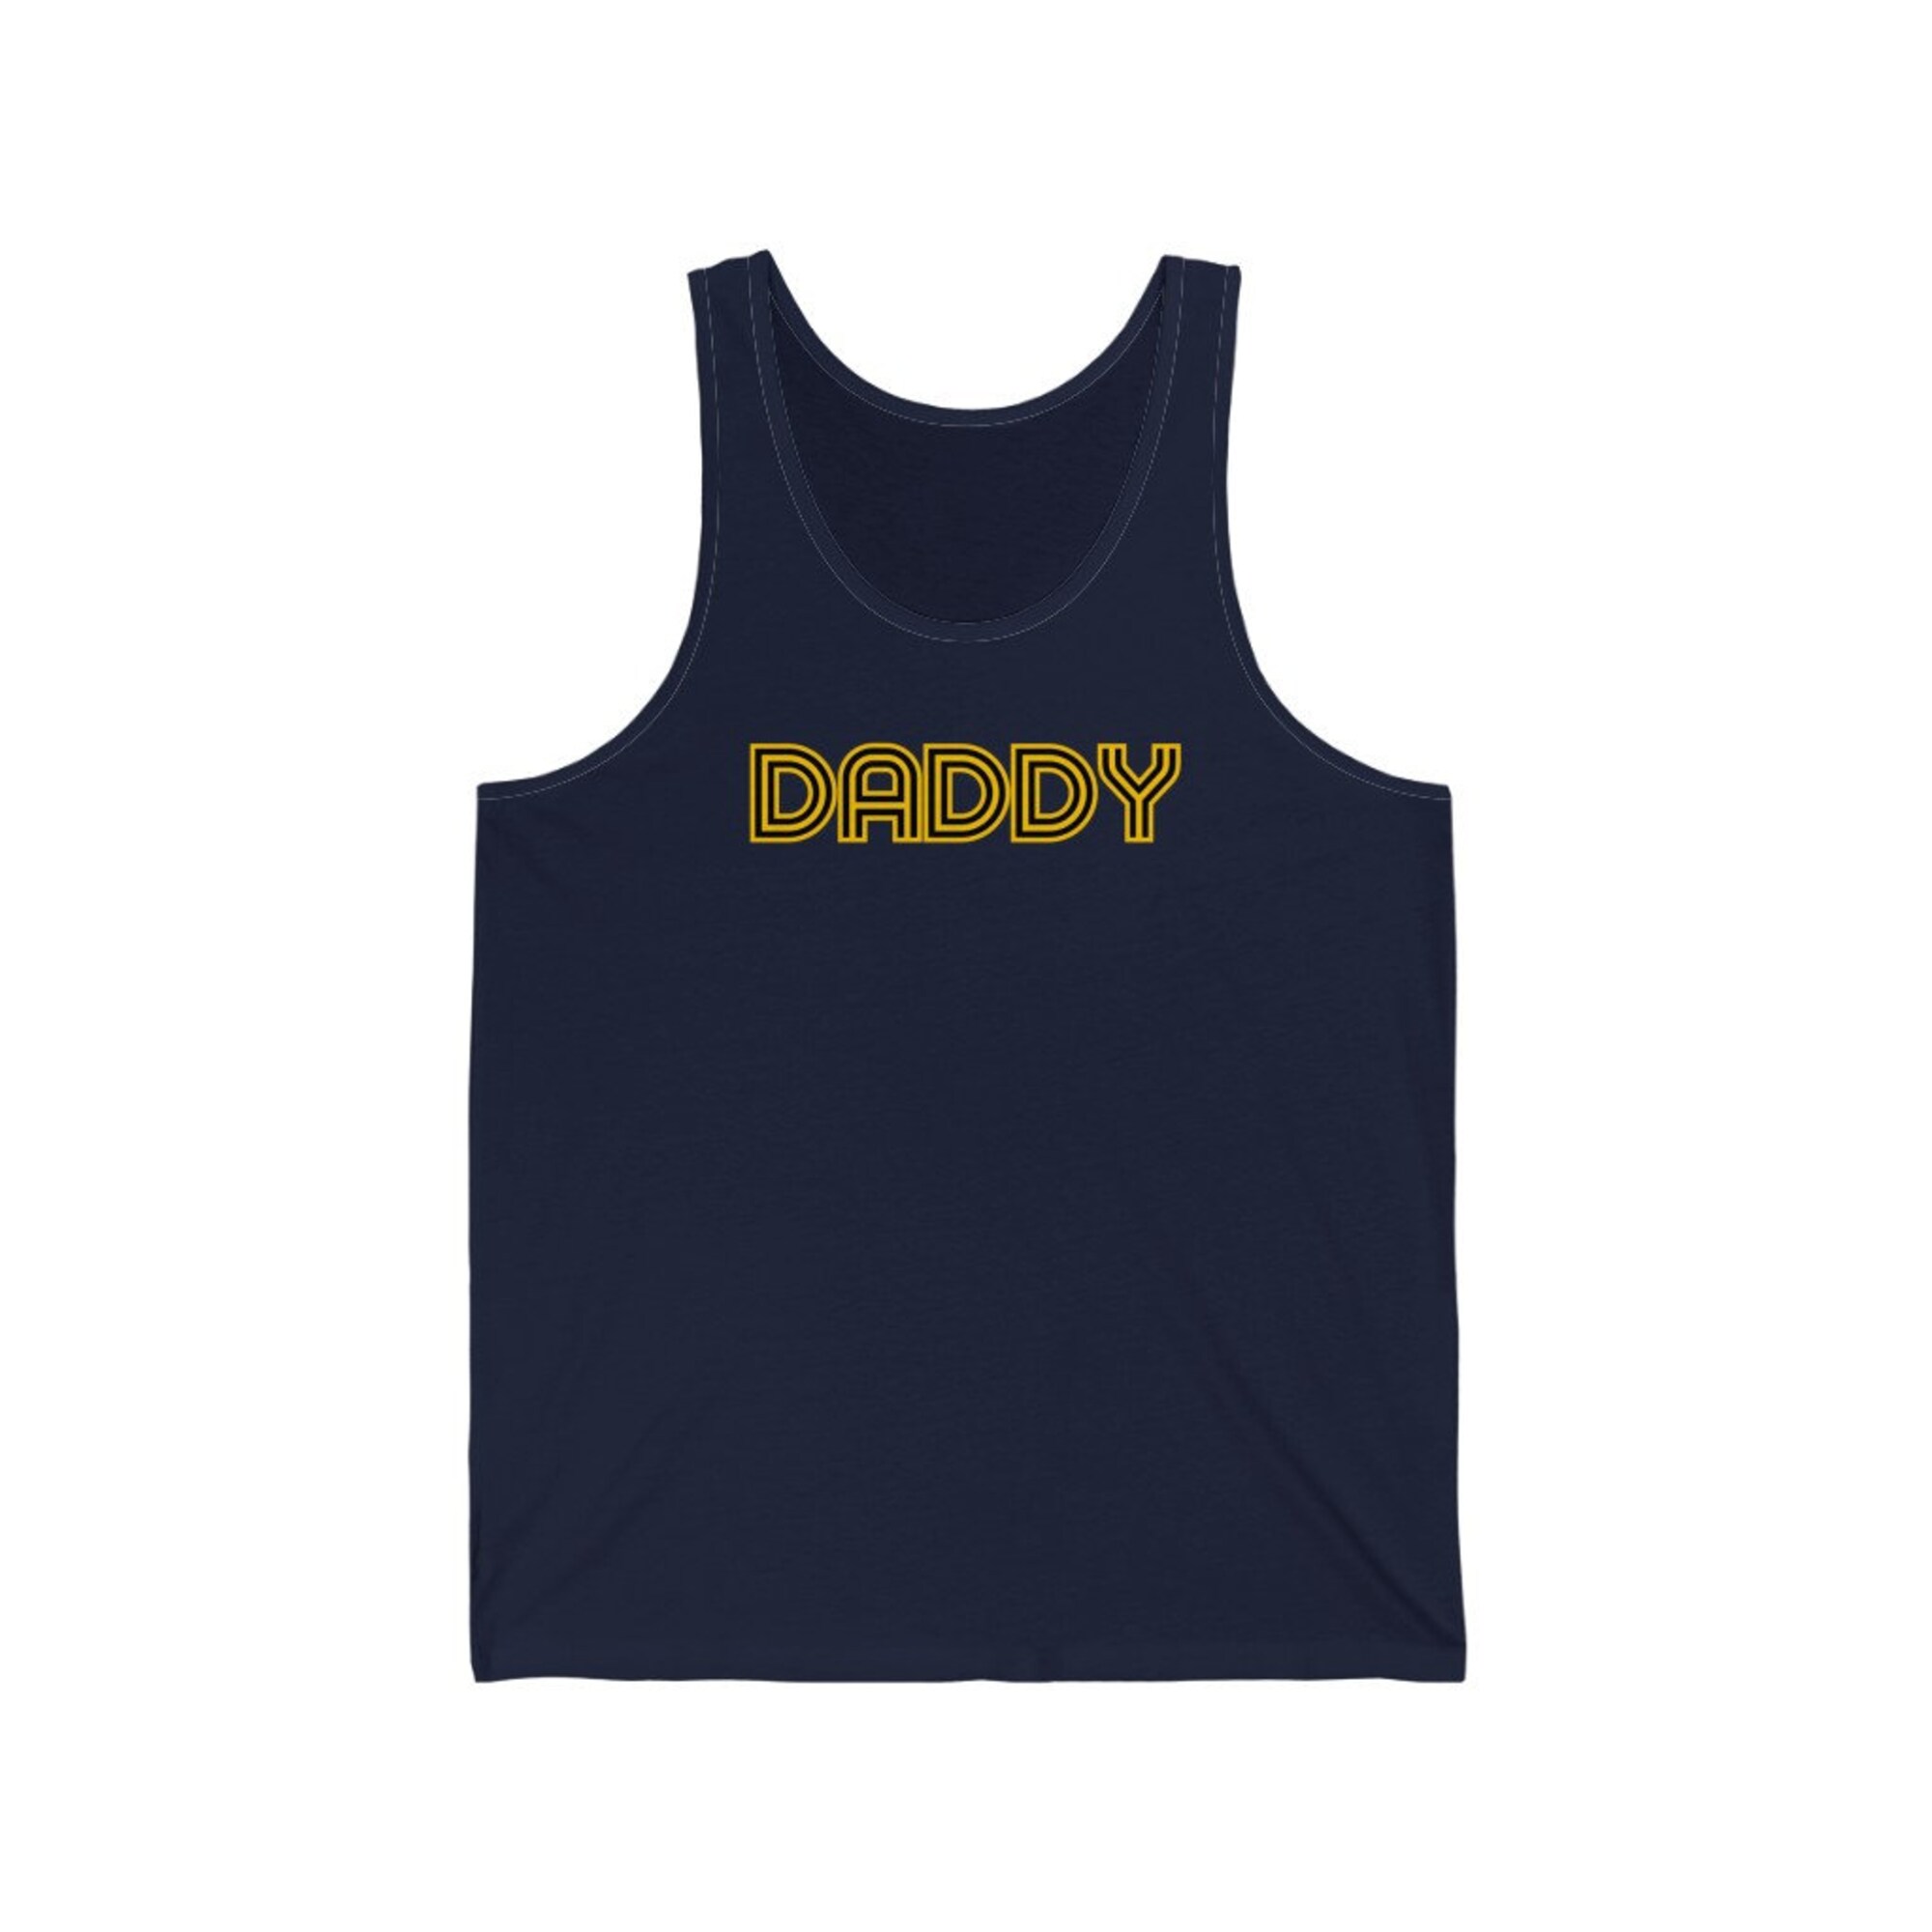 DAD Tank Top Retro Leather DADDY